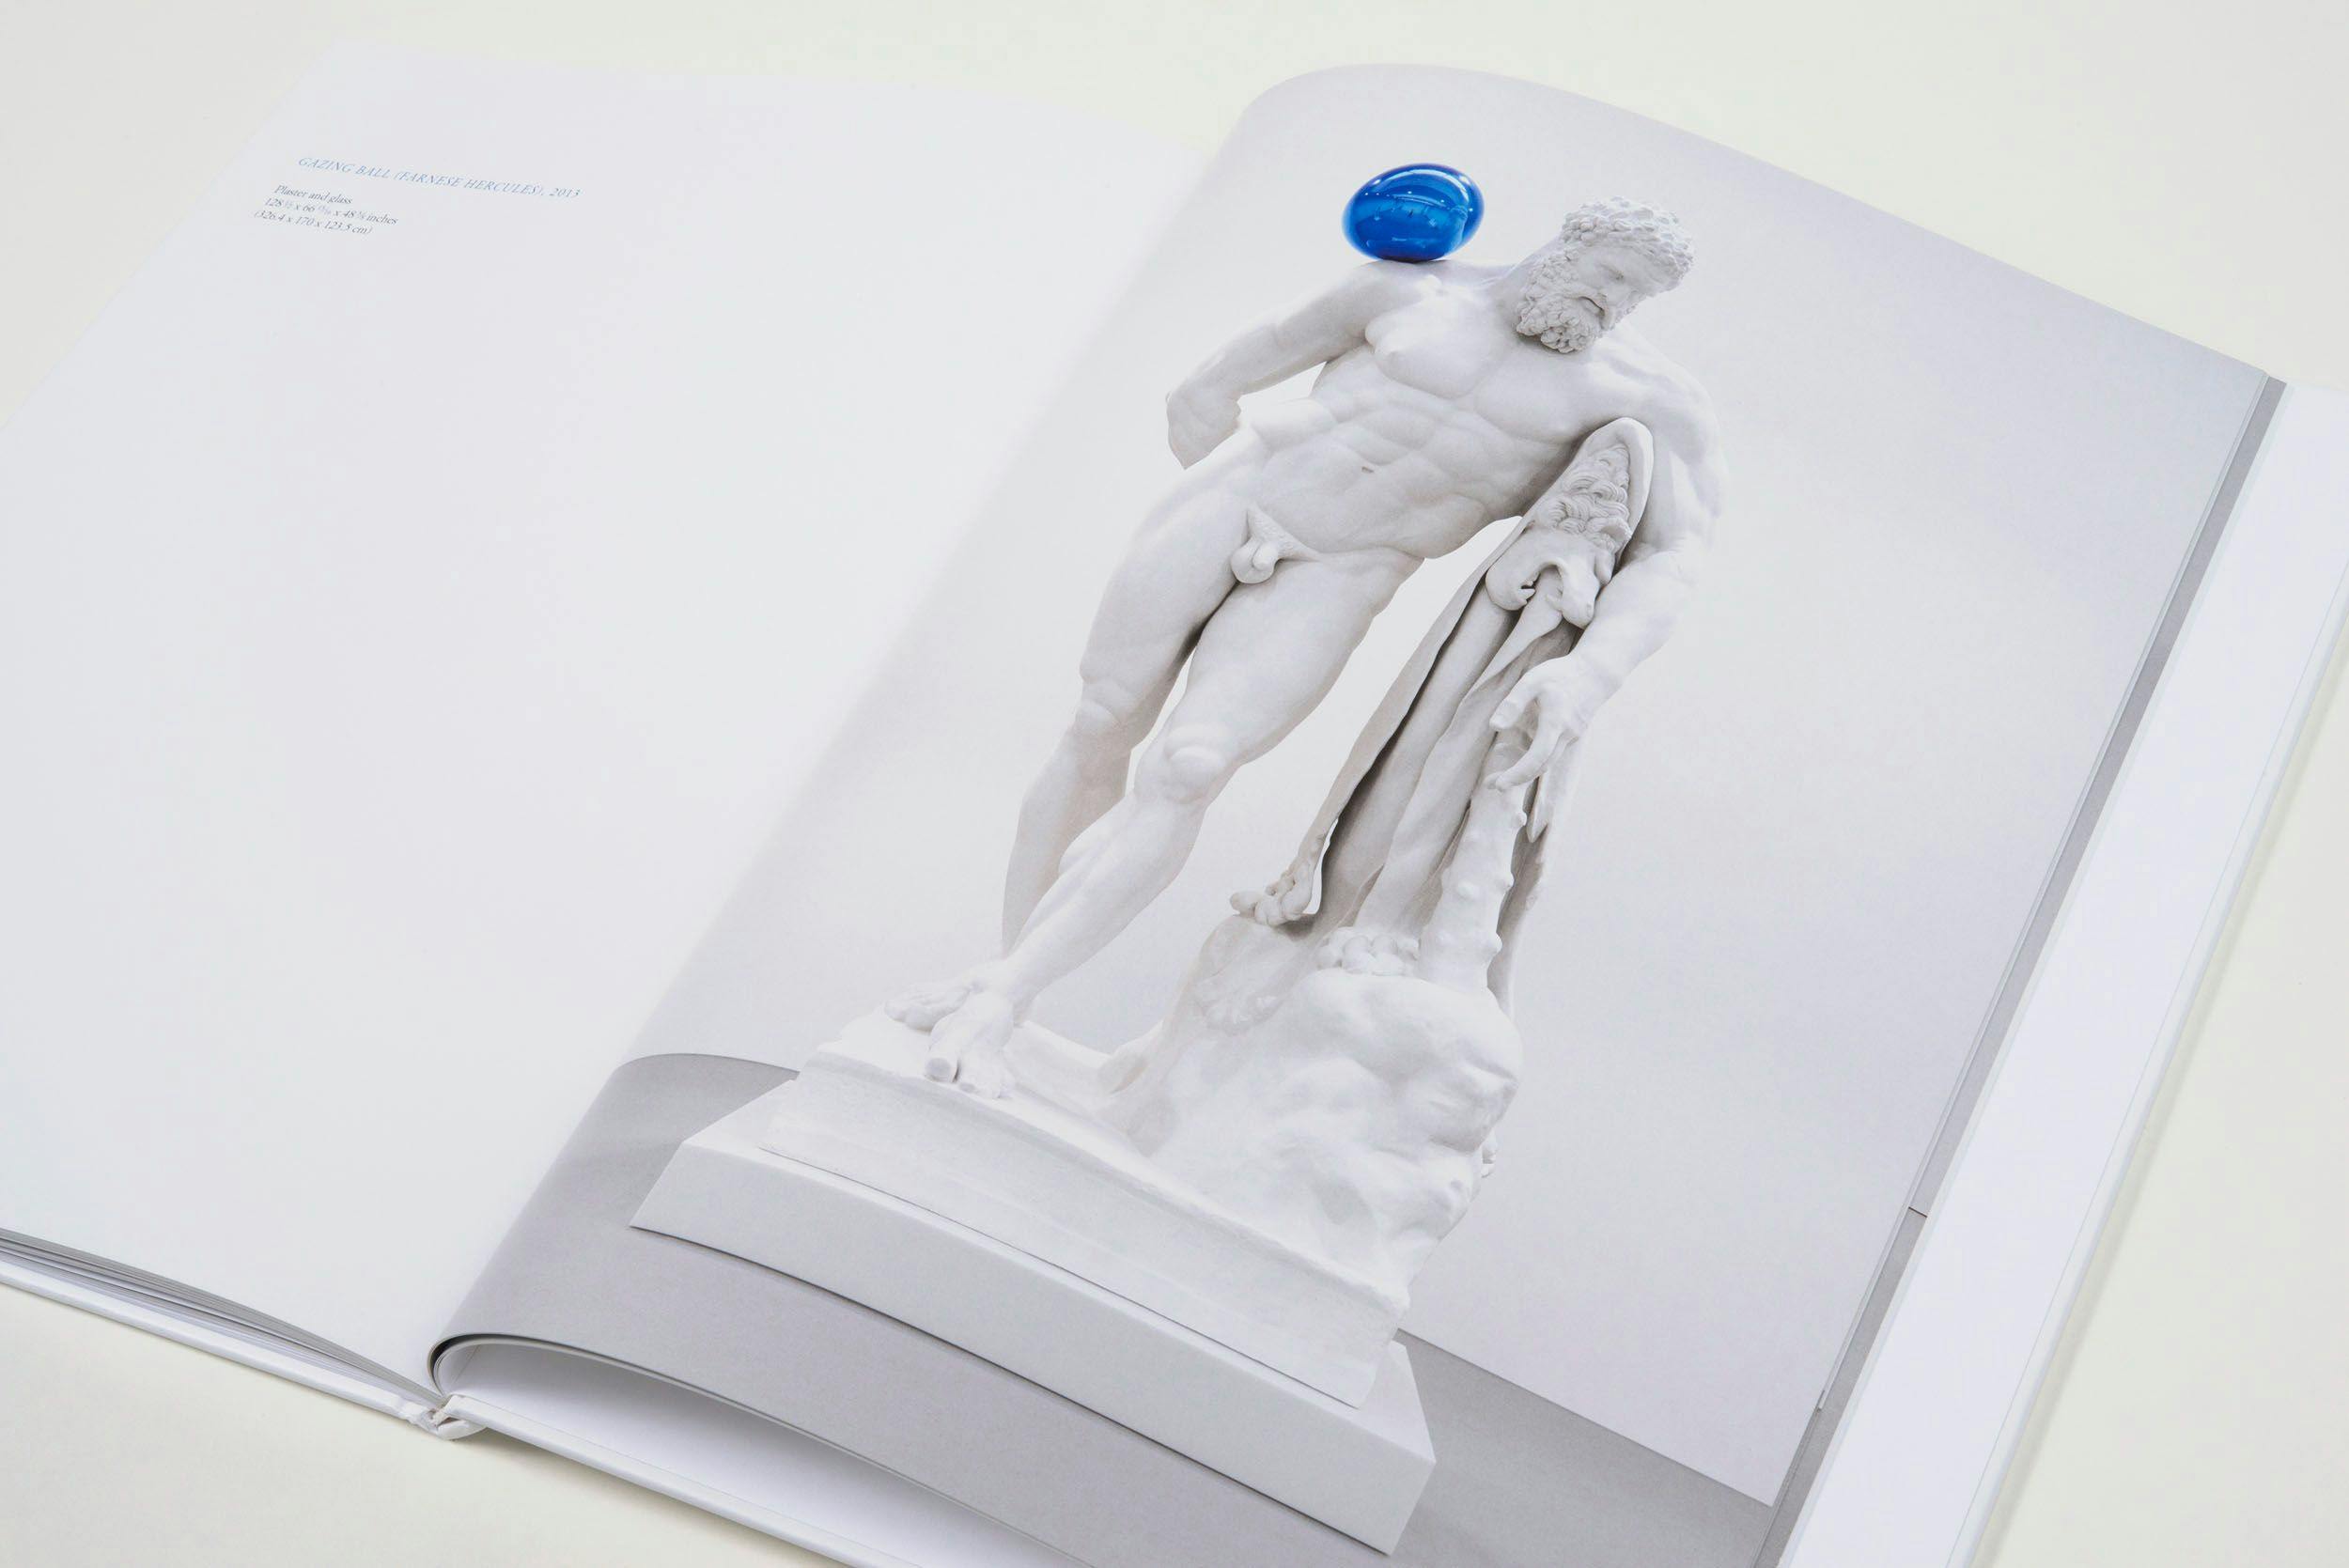 A photograph of a spread from the book Jeff Koons: Gazing Ball, dated 2014.